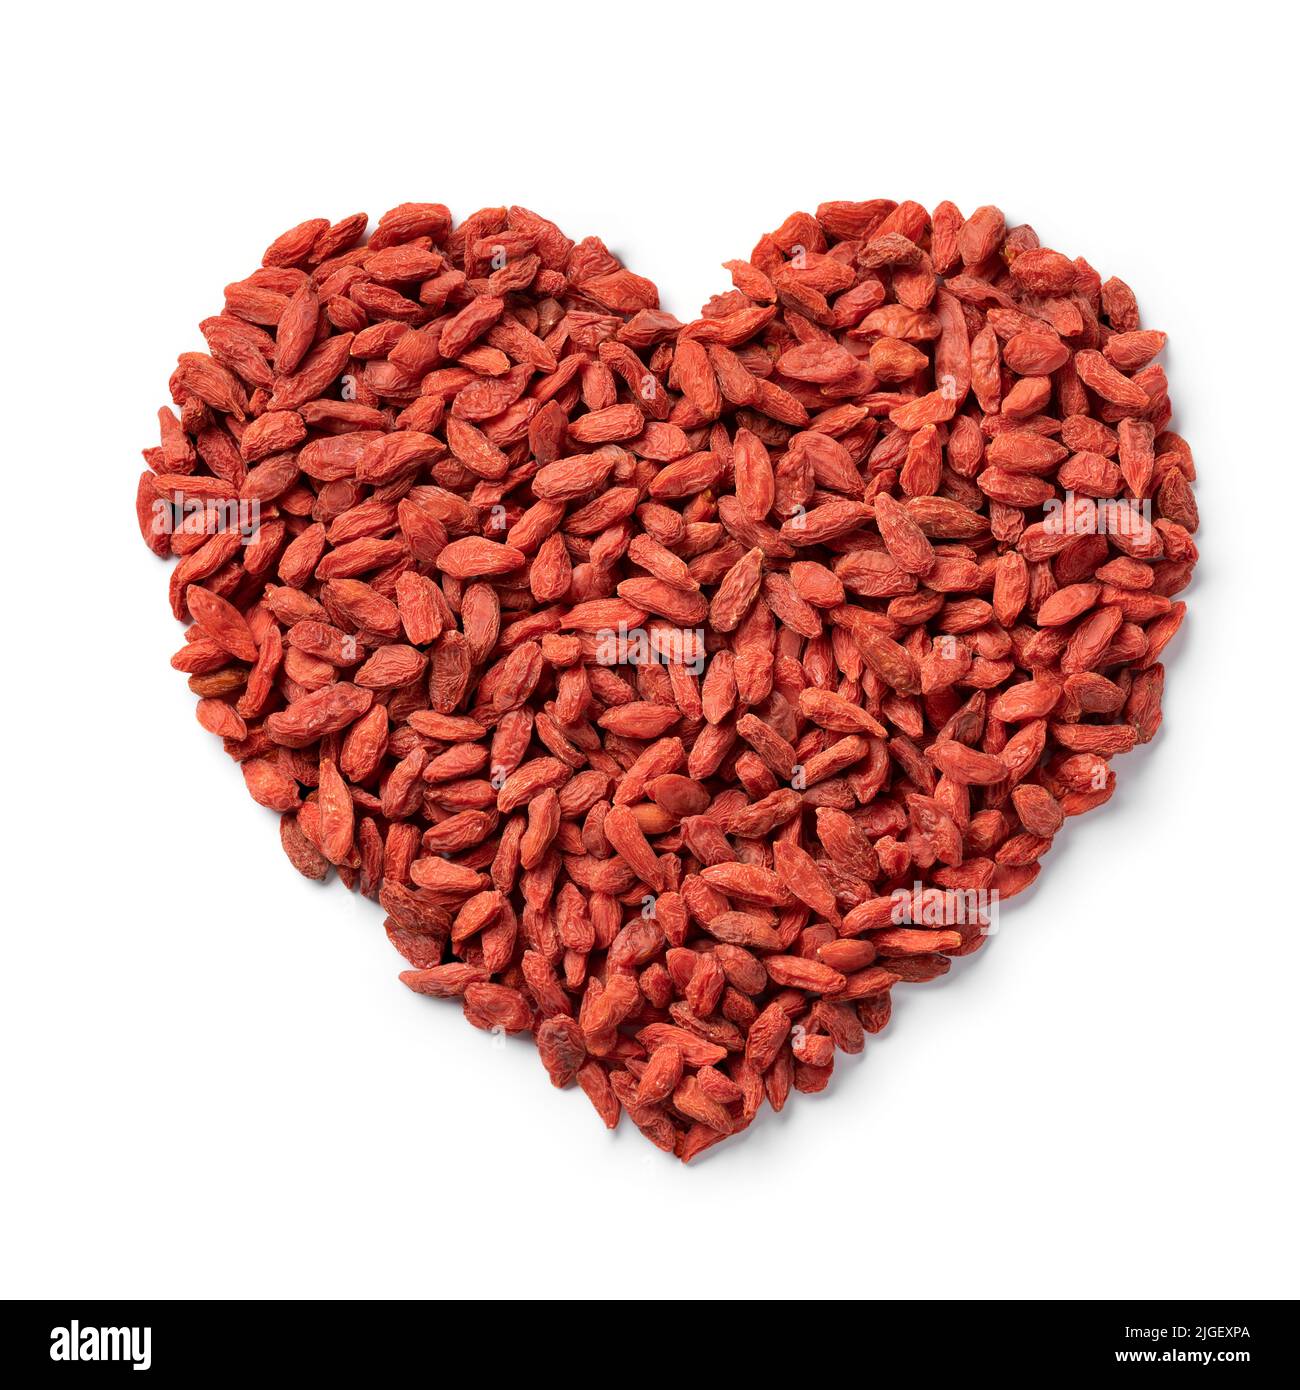 Dried goji berries in heart shape isolated on white background close up Stock Photo